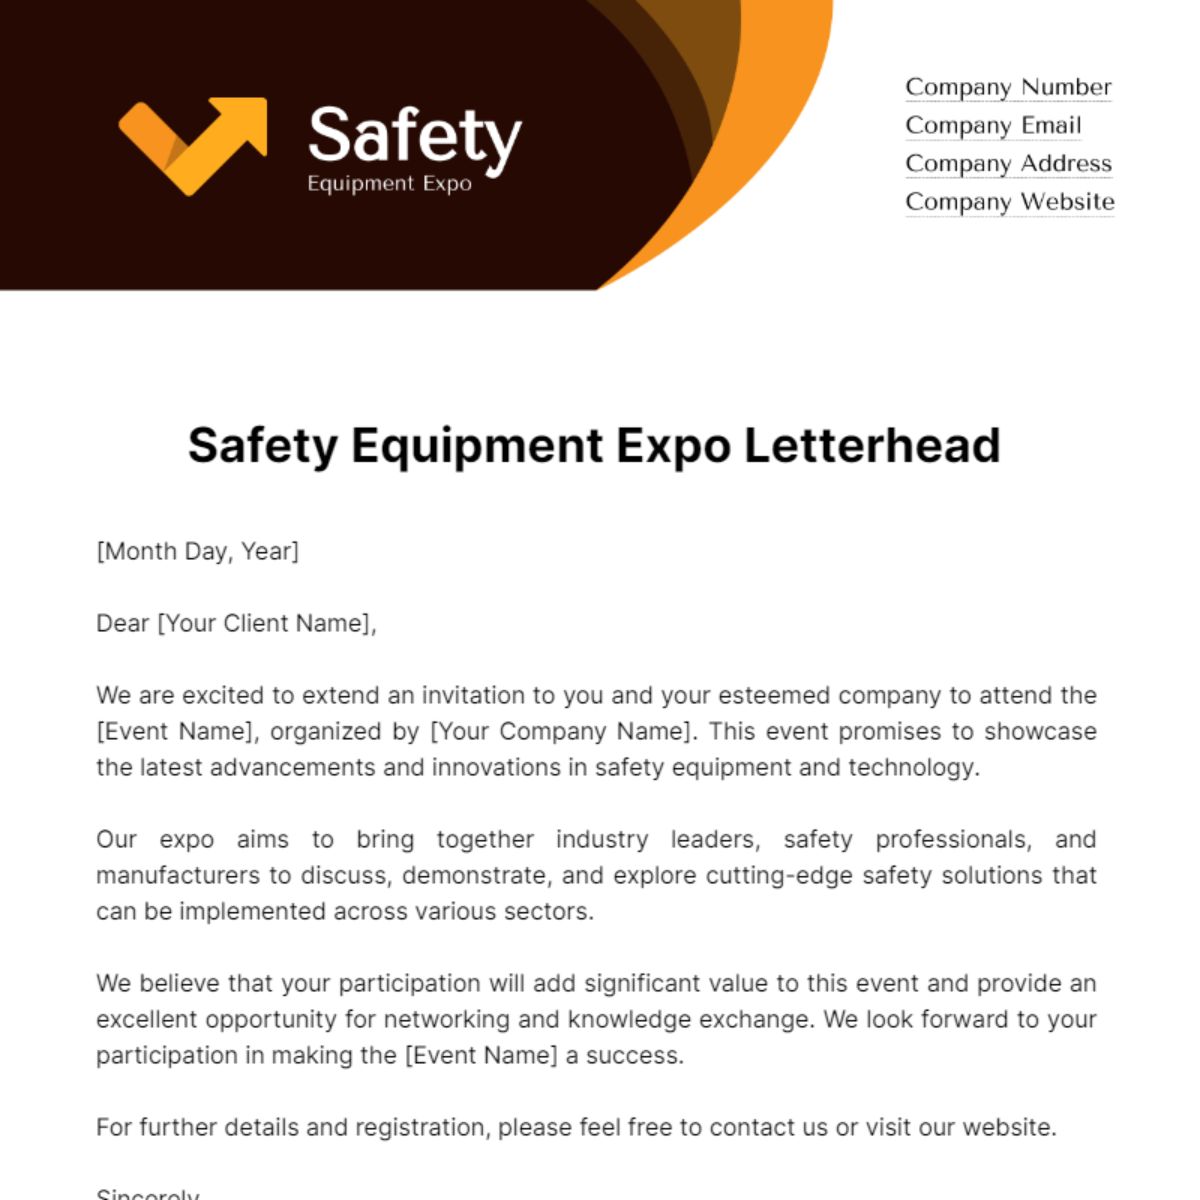 Safety Equipment Expo Letterhead Template